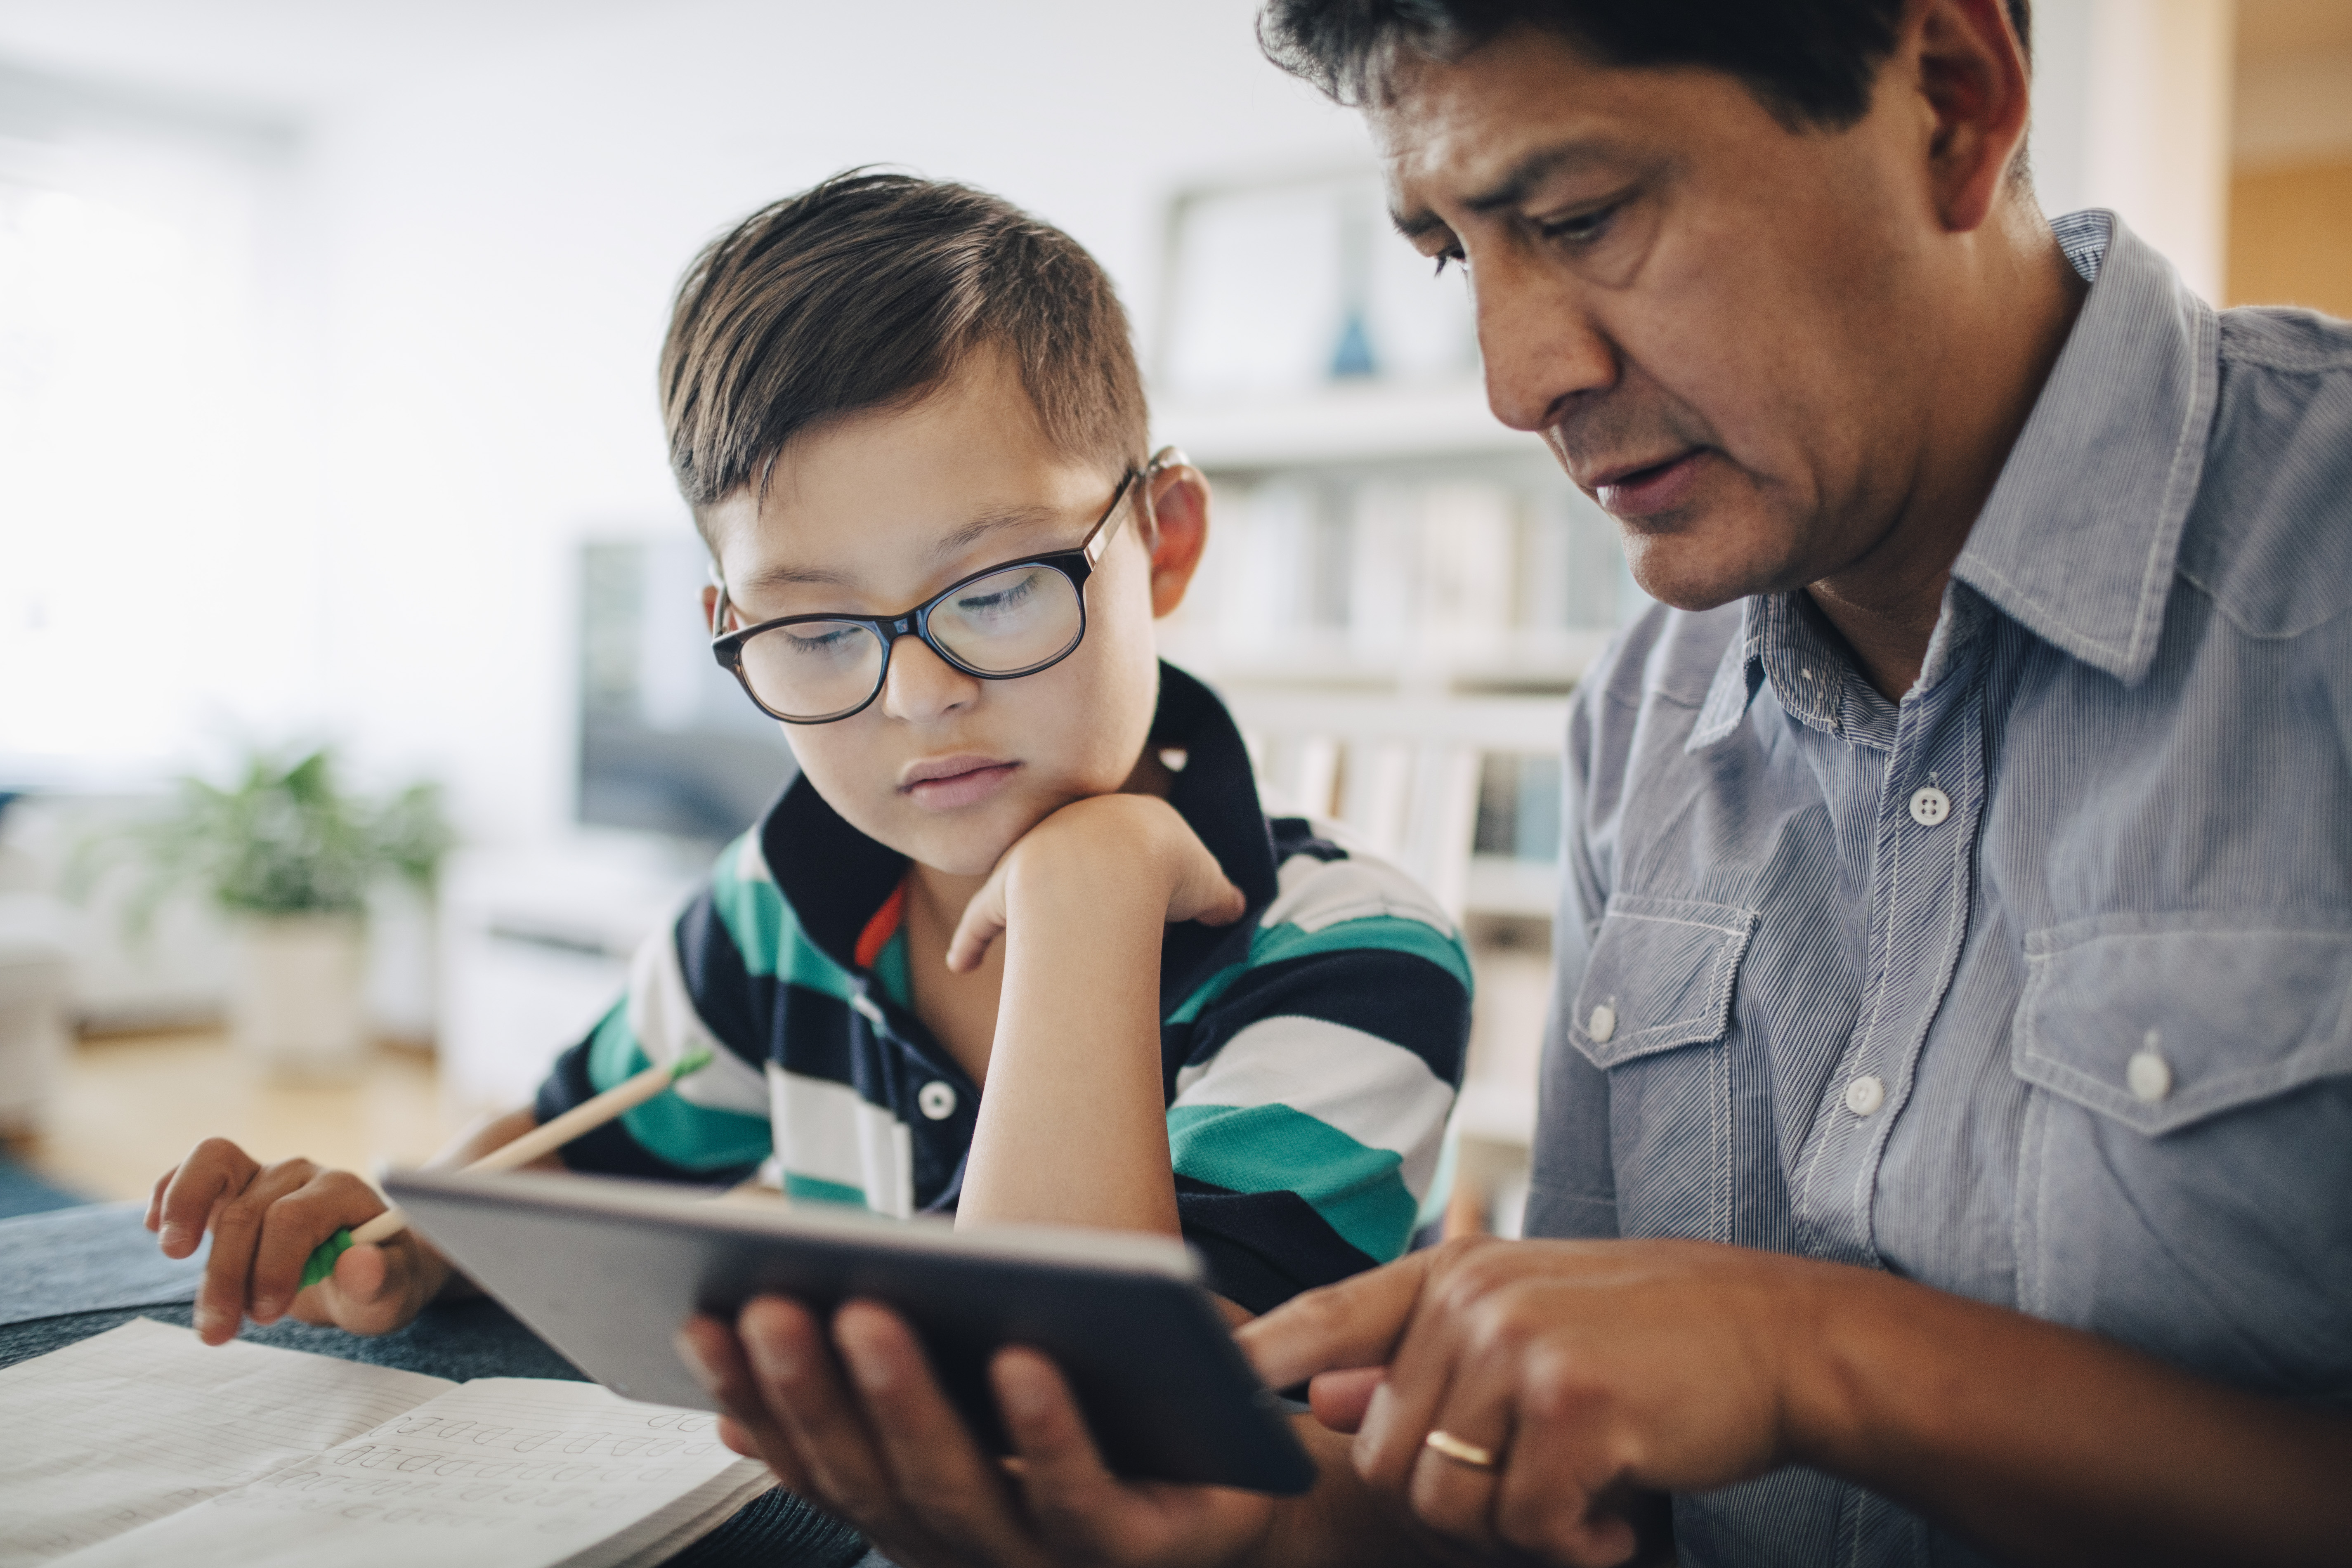 Father showing digital tablet to son while studying at table | Source: Getty Images